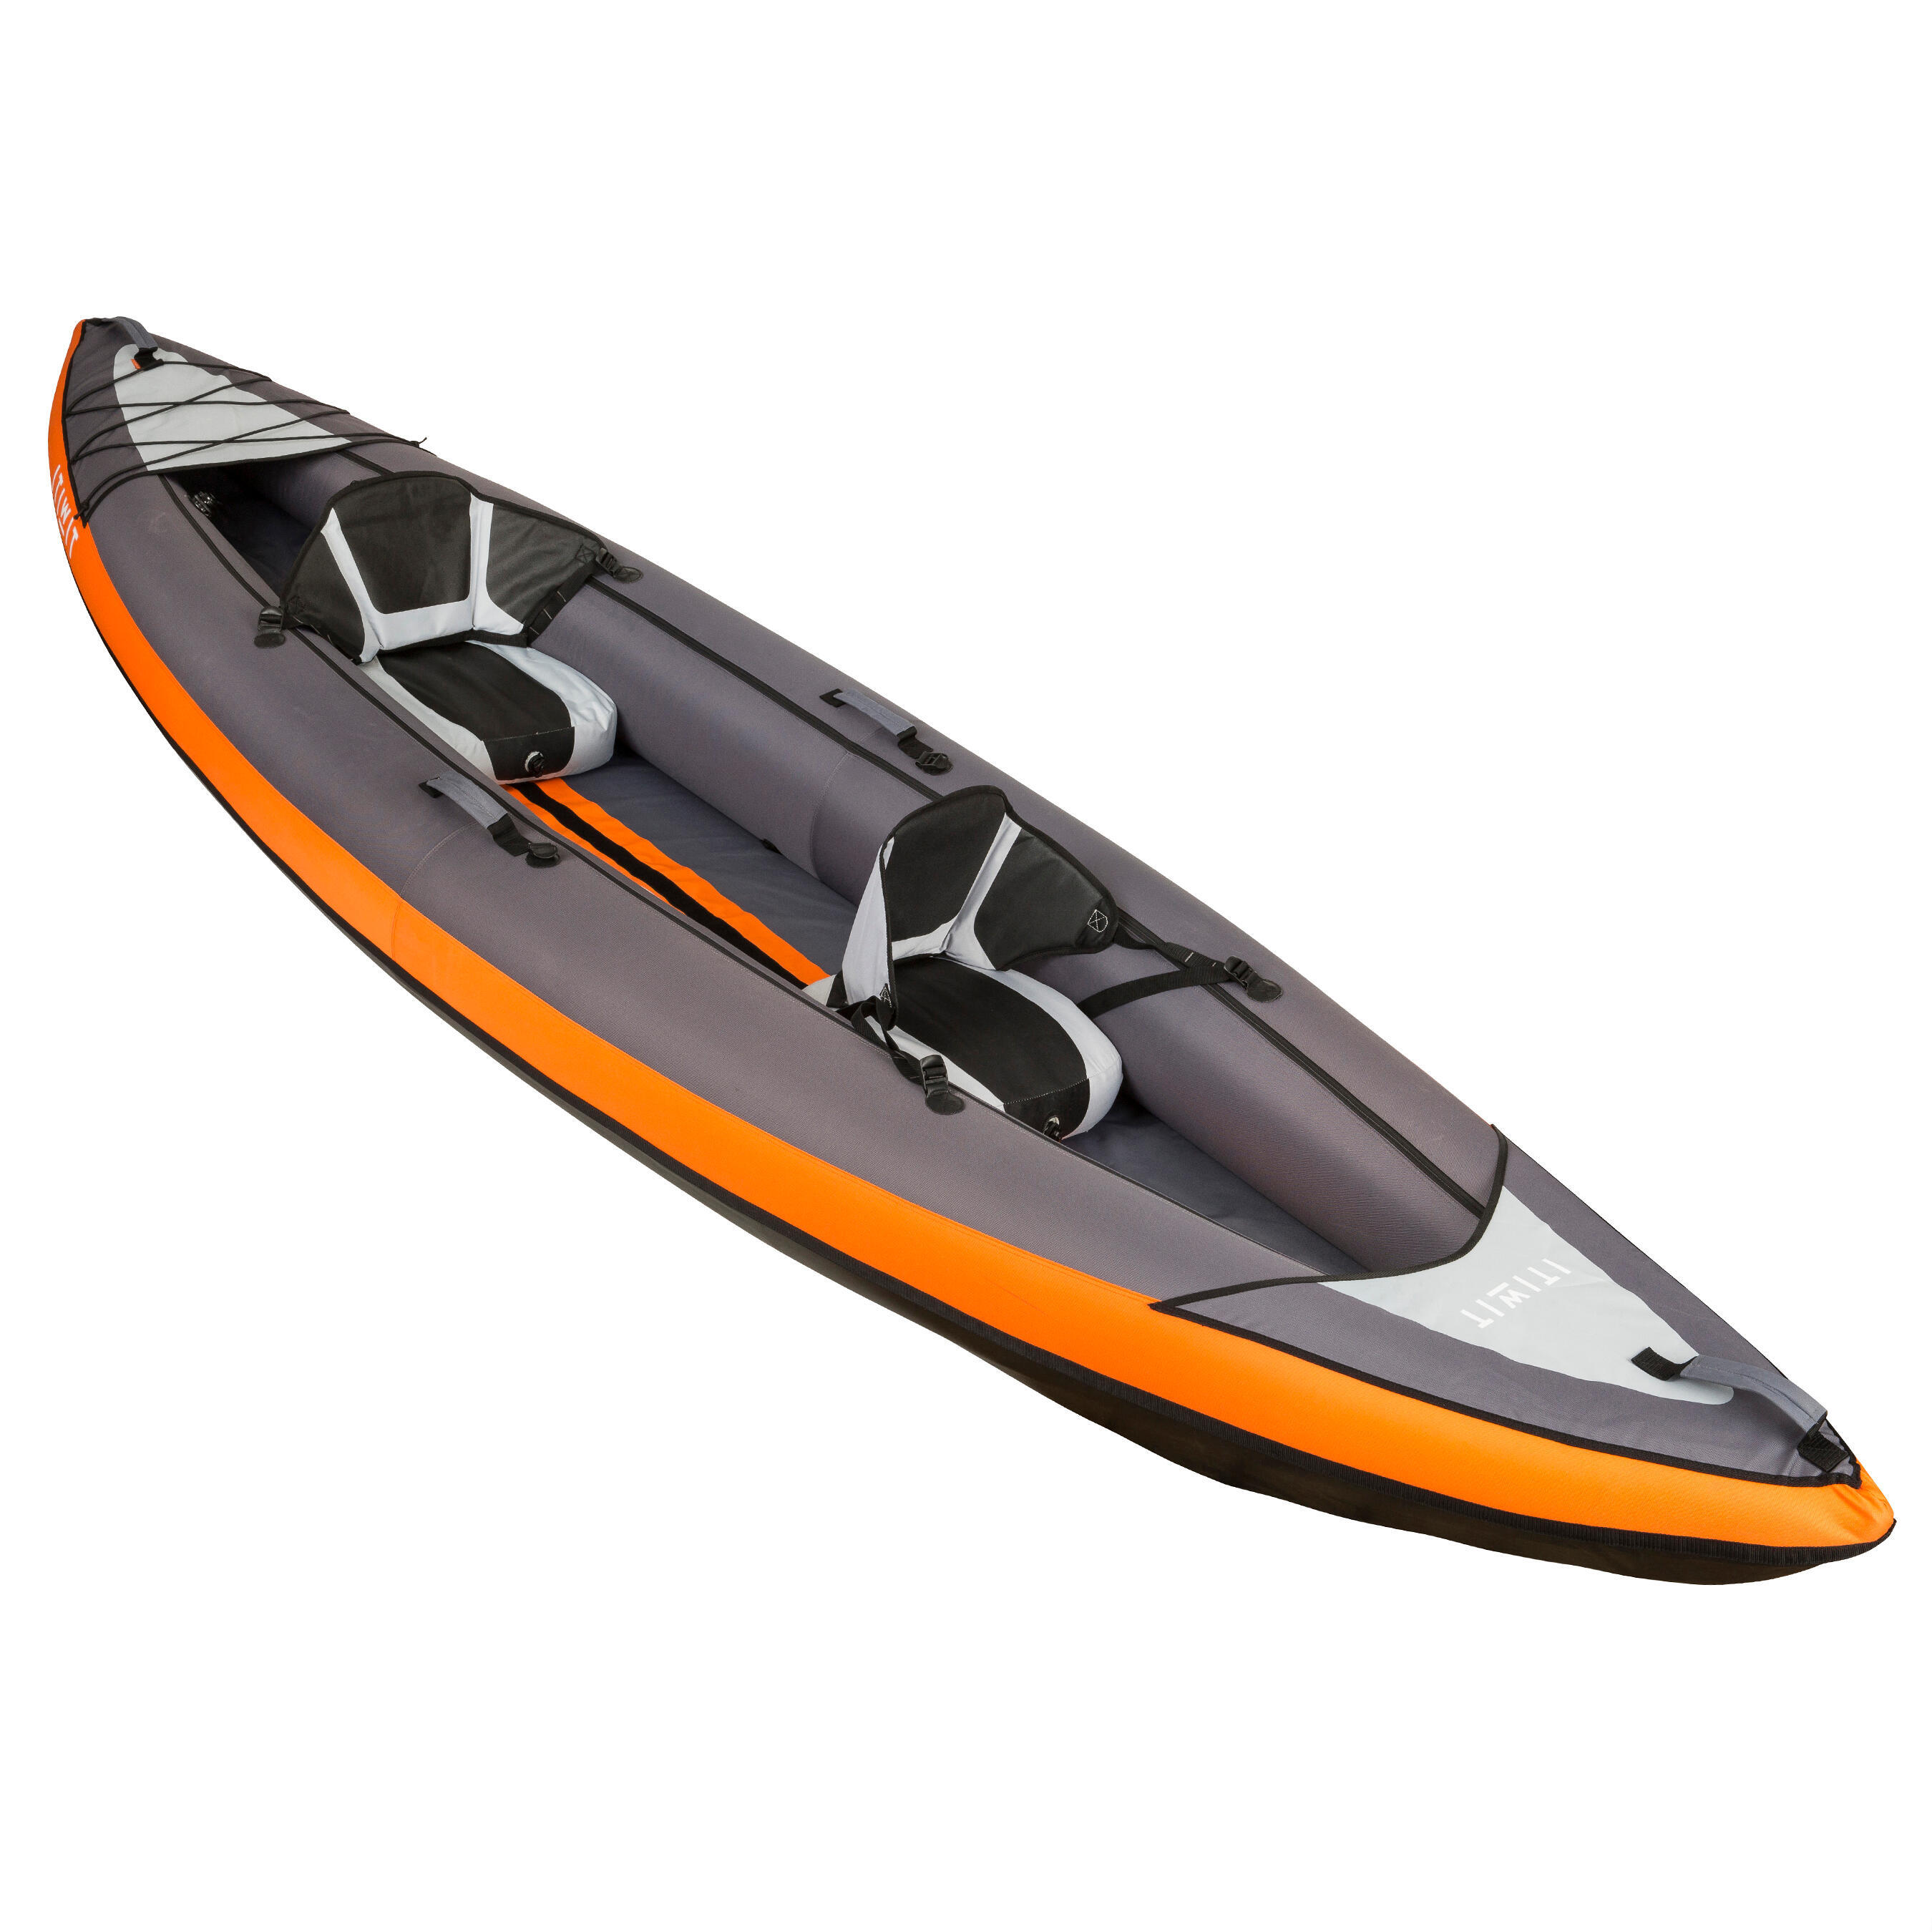 TEXTILE FLOOR COVER FOR ITIWIT 100 3-SEATER KAYAKS 6/7